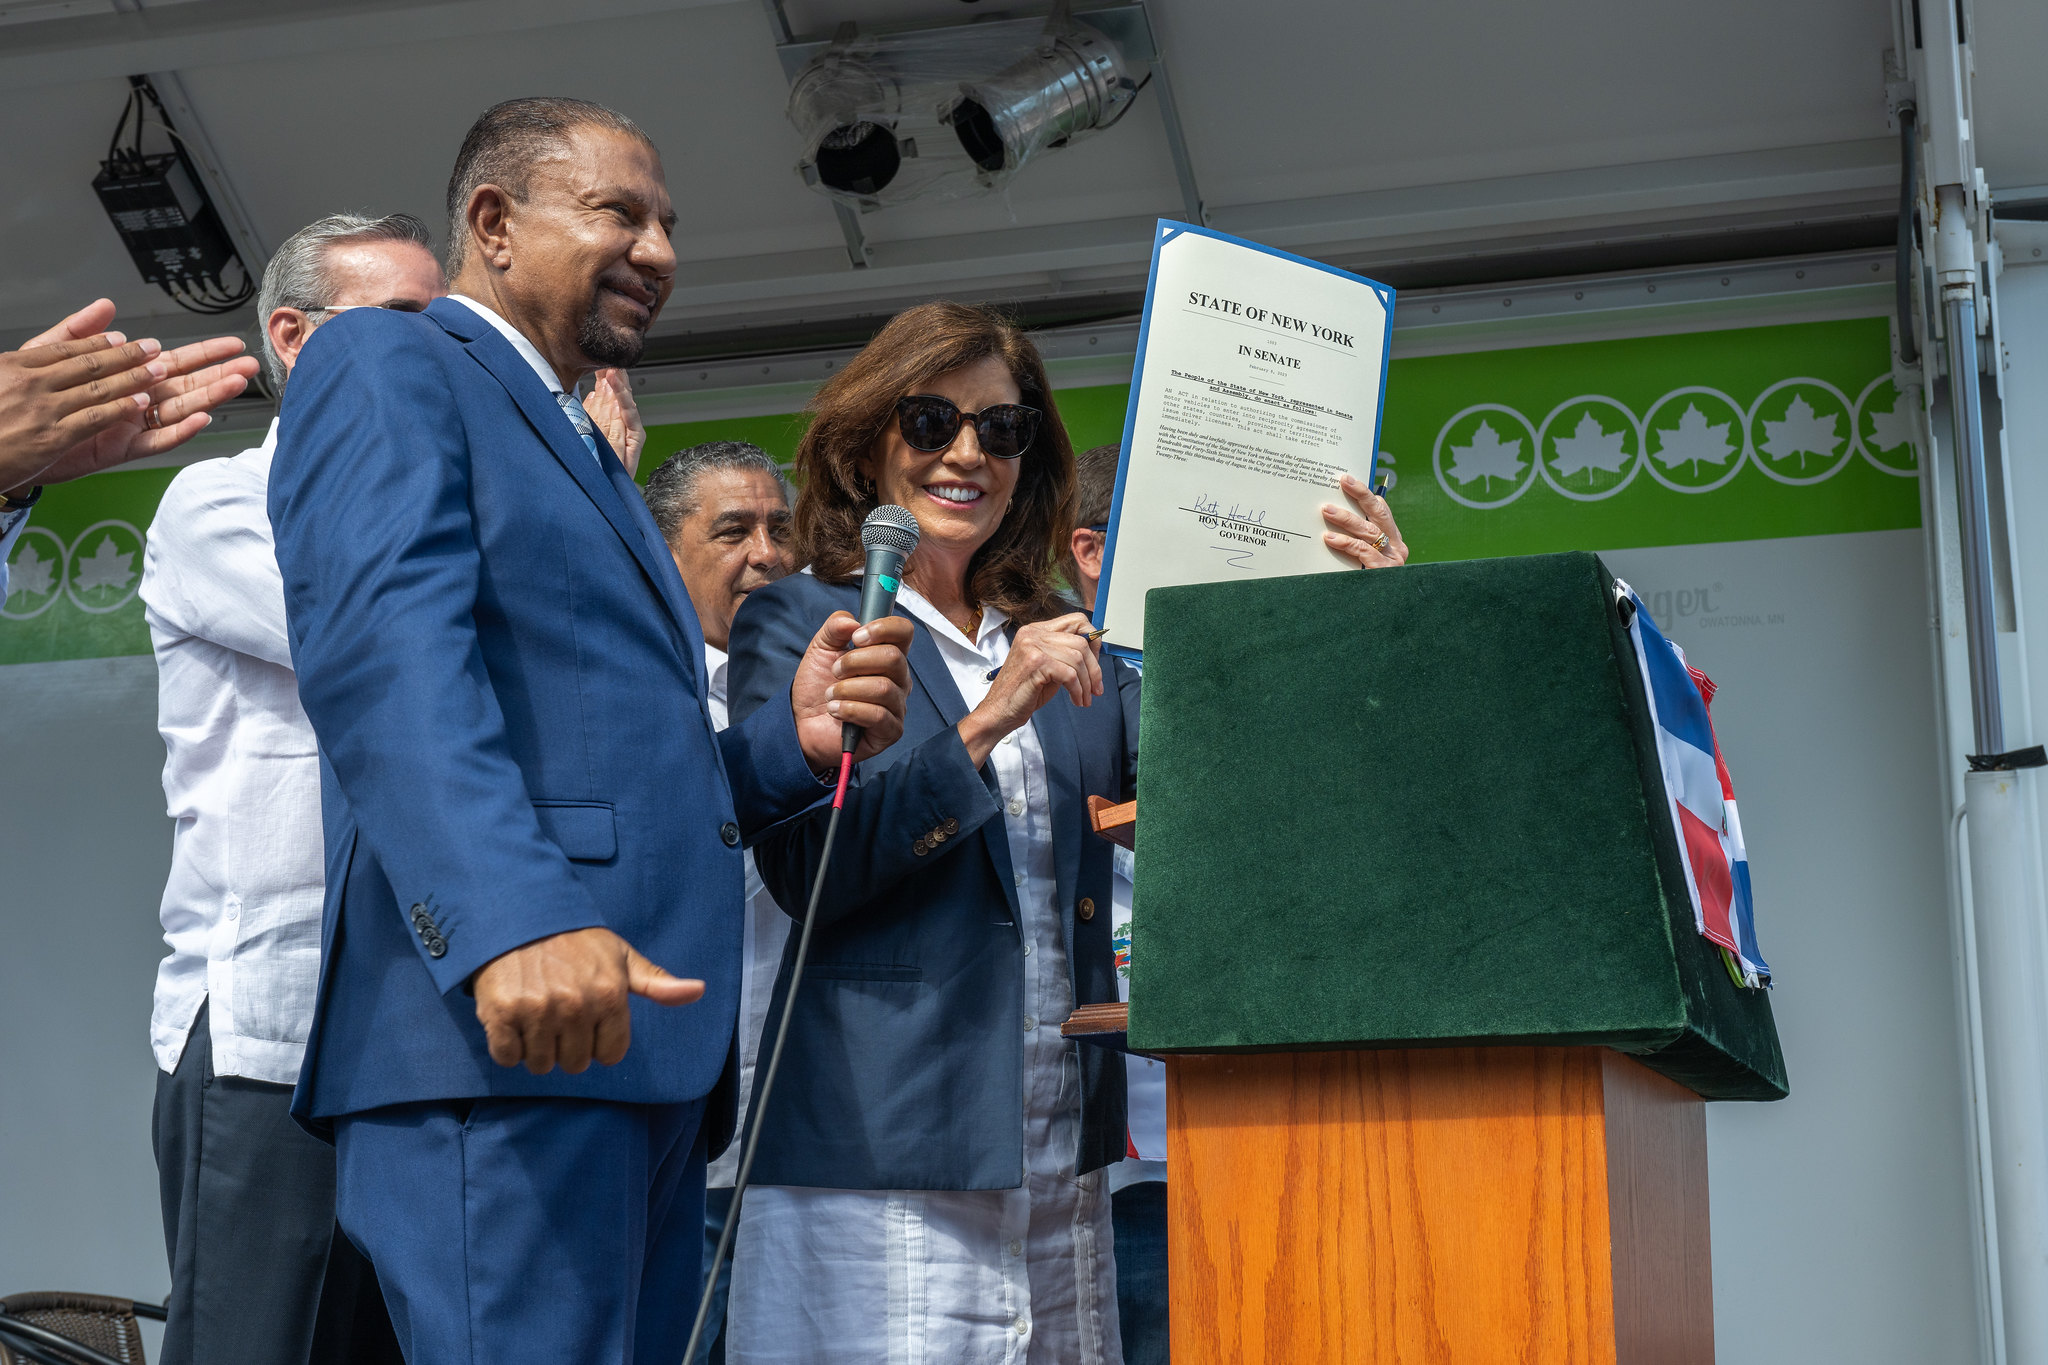 Kathy Hochul signs a bill at the Dominican Day Breakfast in the Bronx, as Deputy Speaker Phil Ramos looks on.